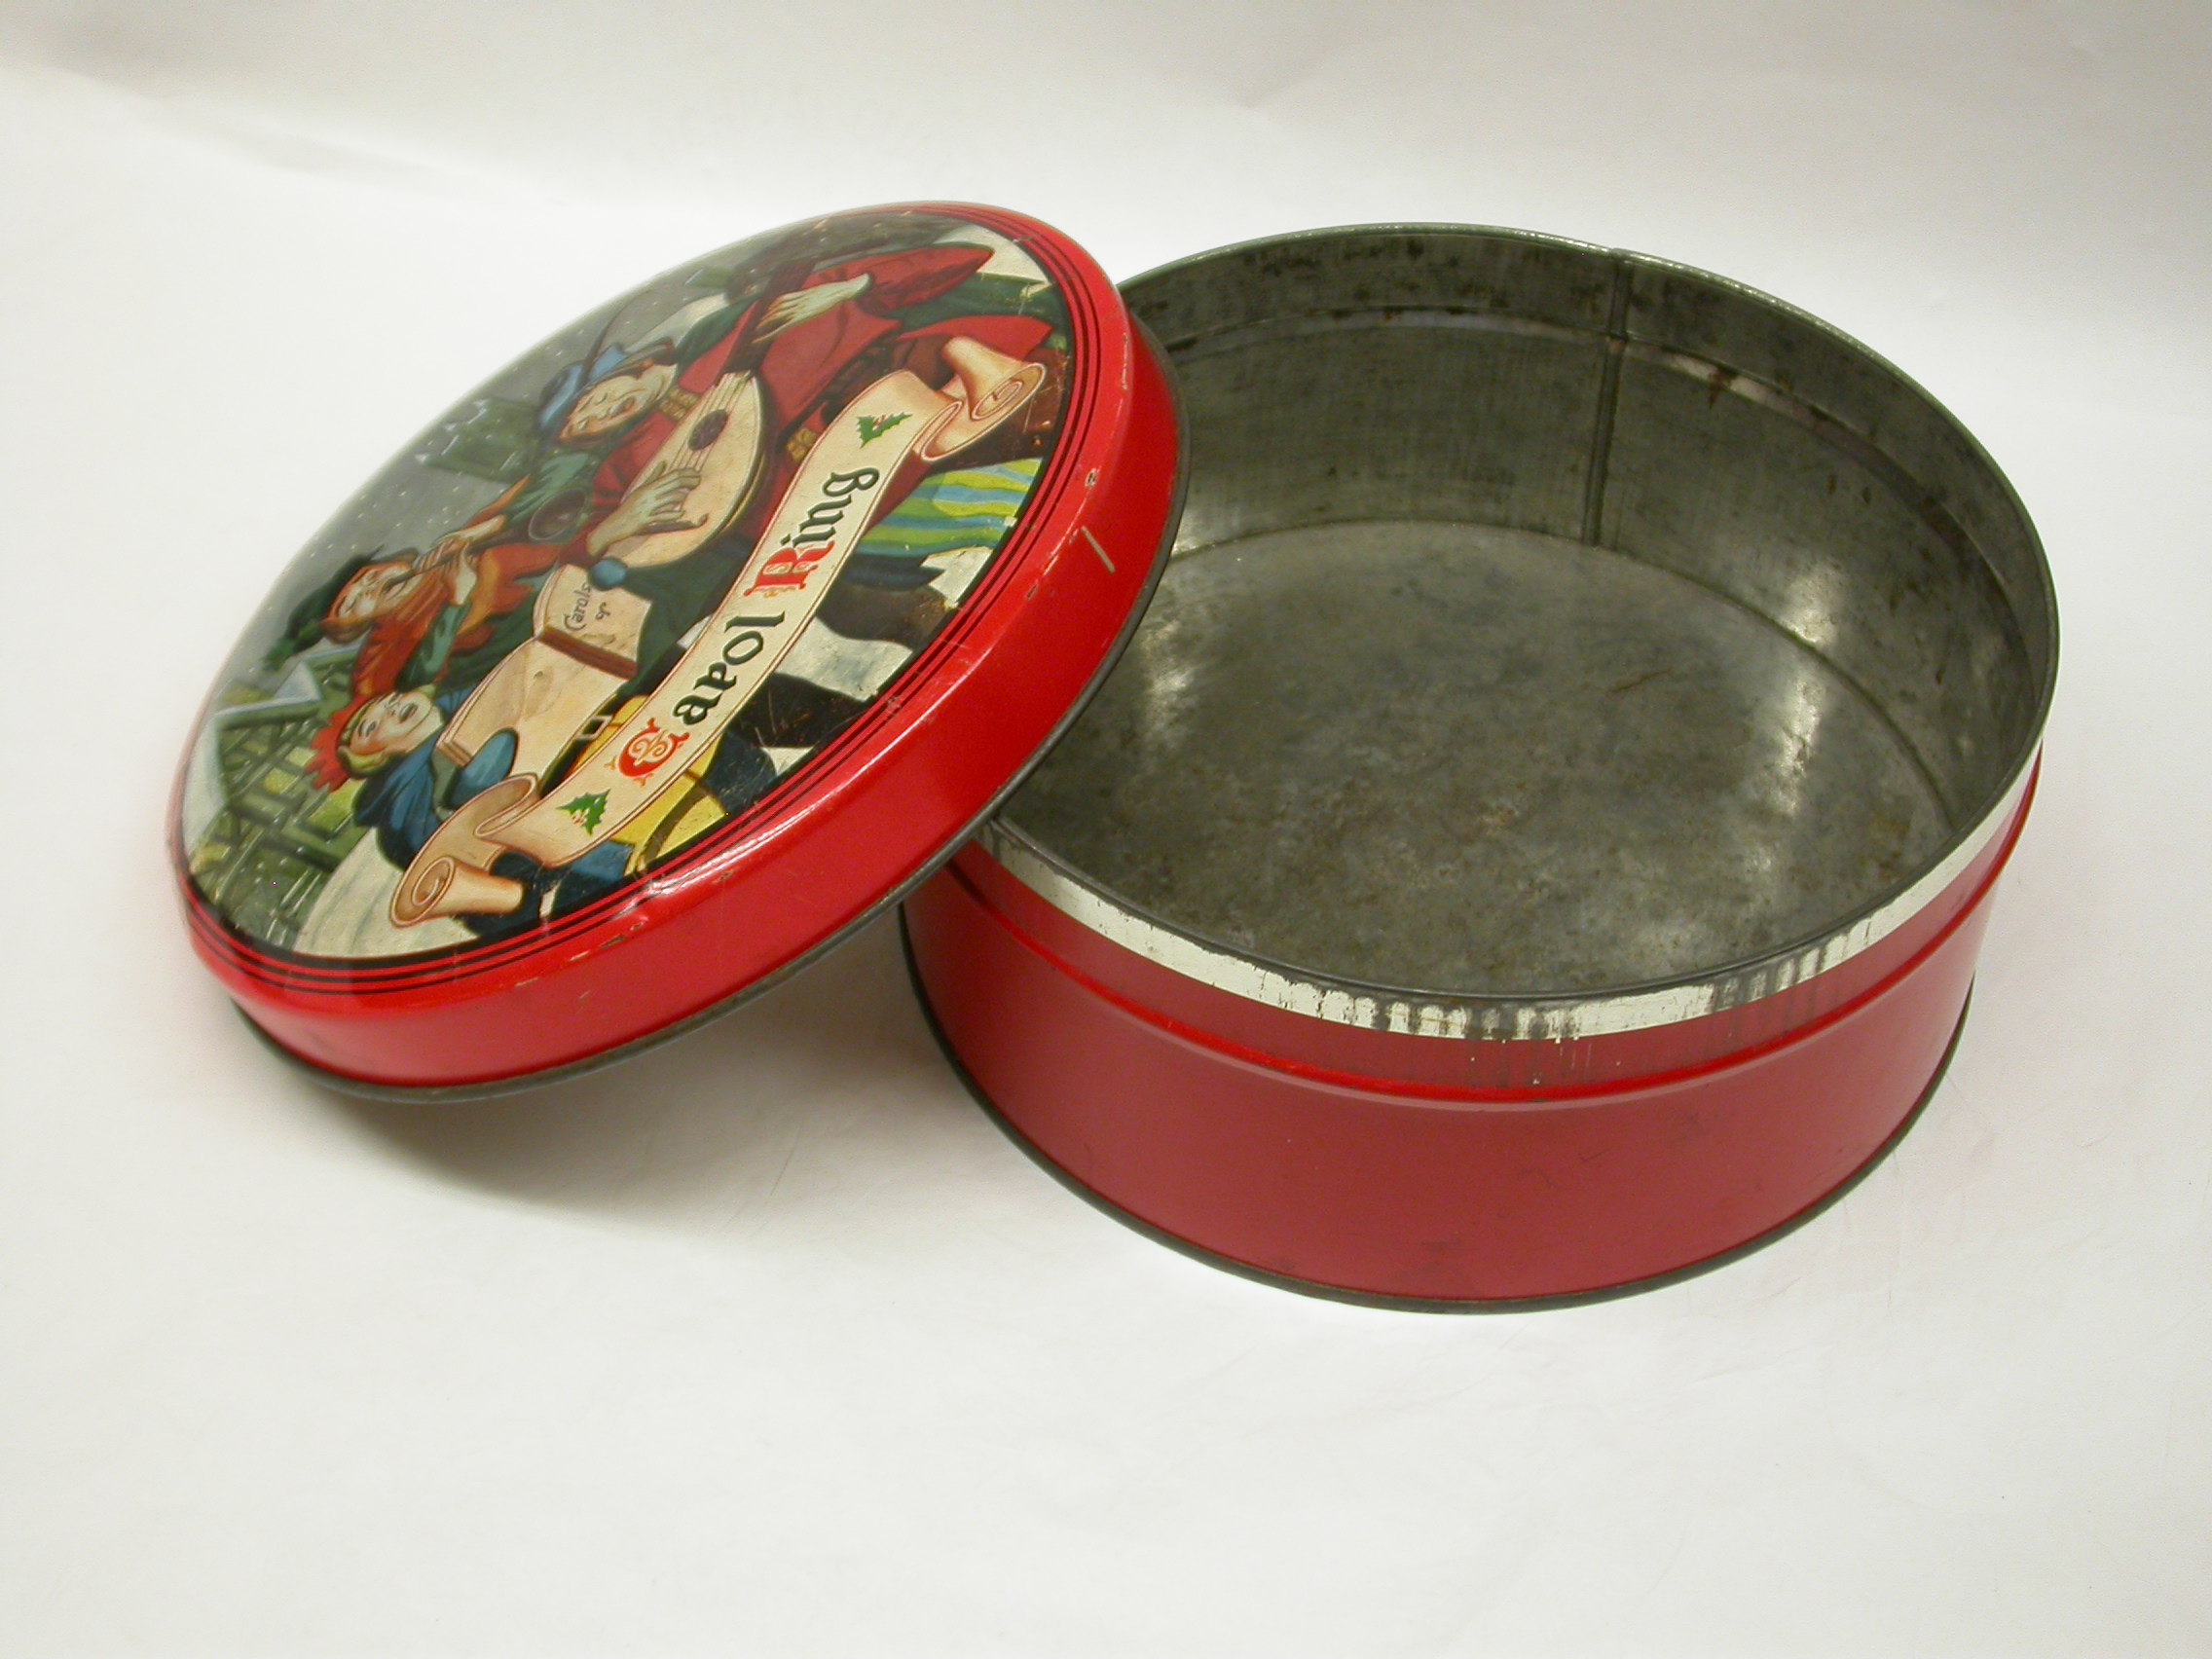 a%20round%2C%20red-coloured%20cookie%20tin%20with%20Christmas%20scene%20on%20lid